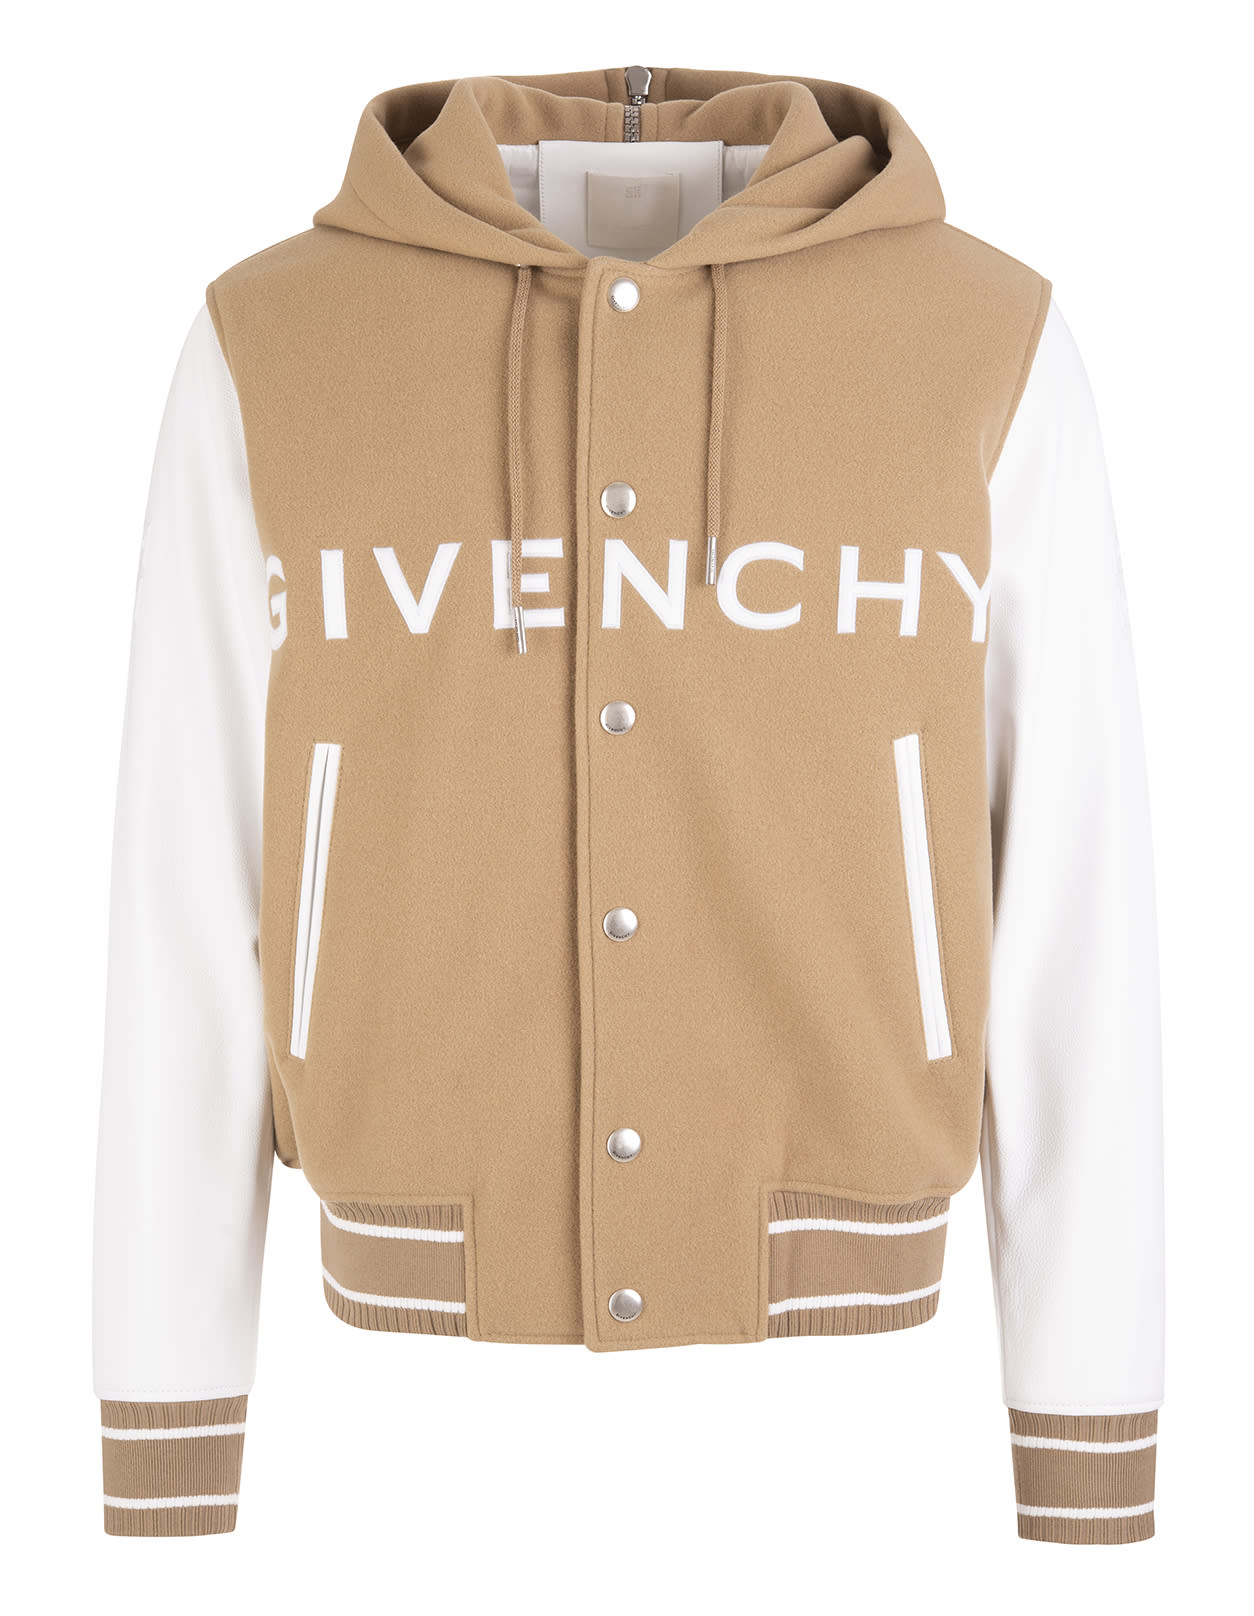 GIVENCHY MAN WHITE AND BEIGE HOODED BOMBER IN WOOL AND LEATHER